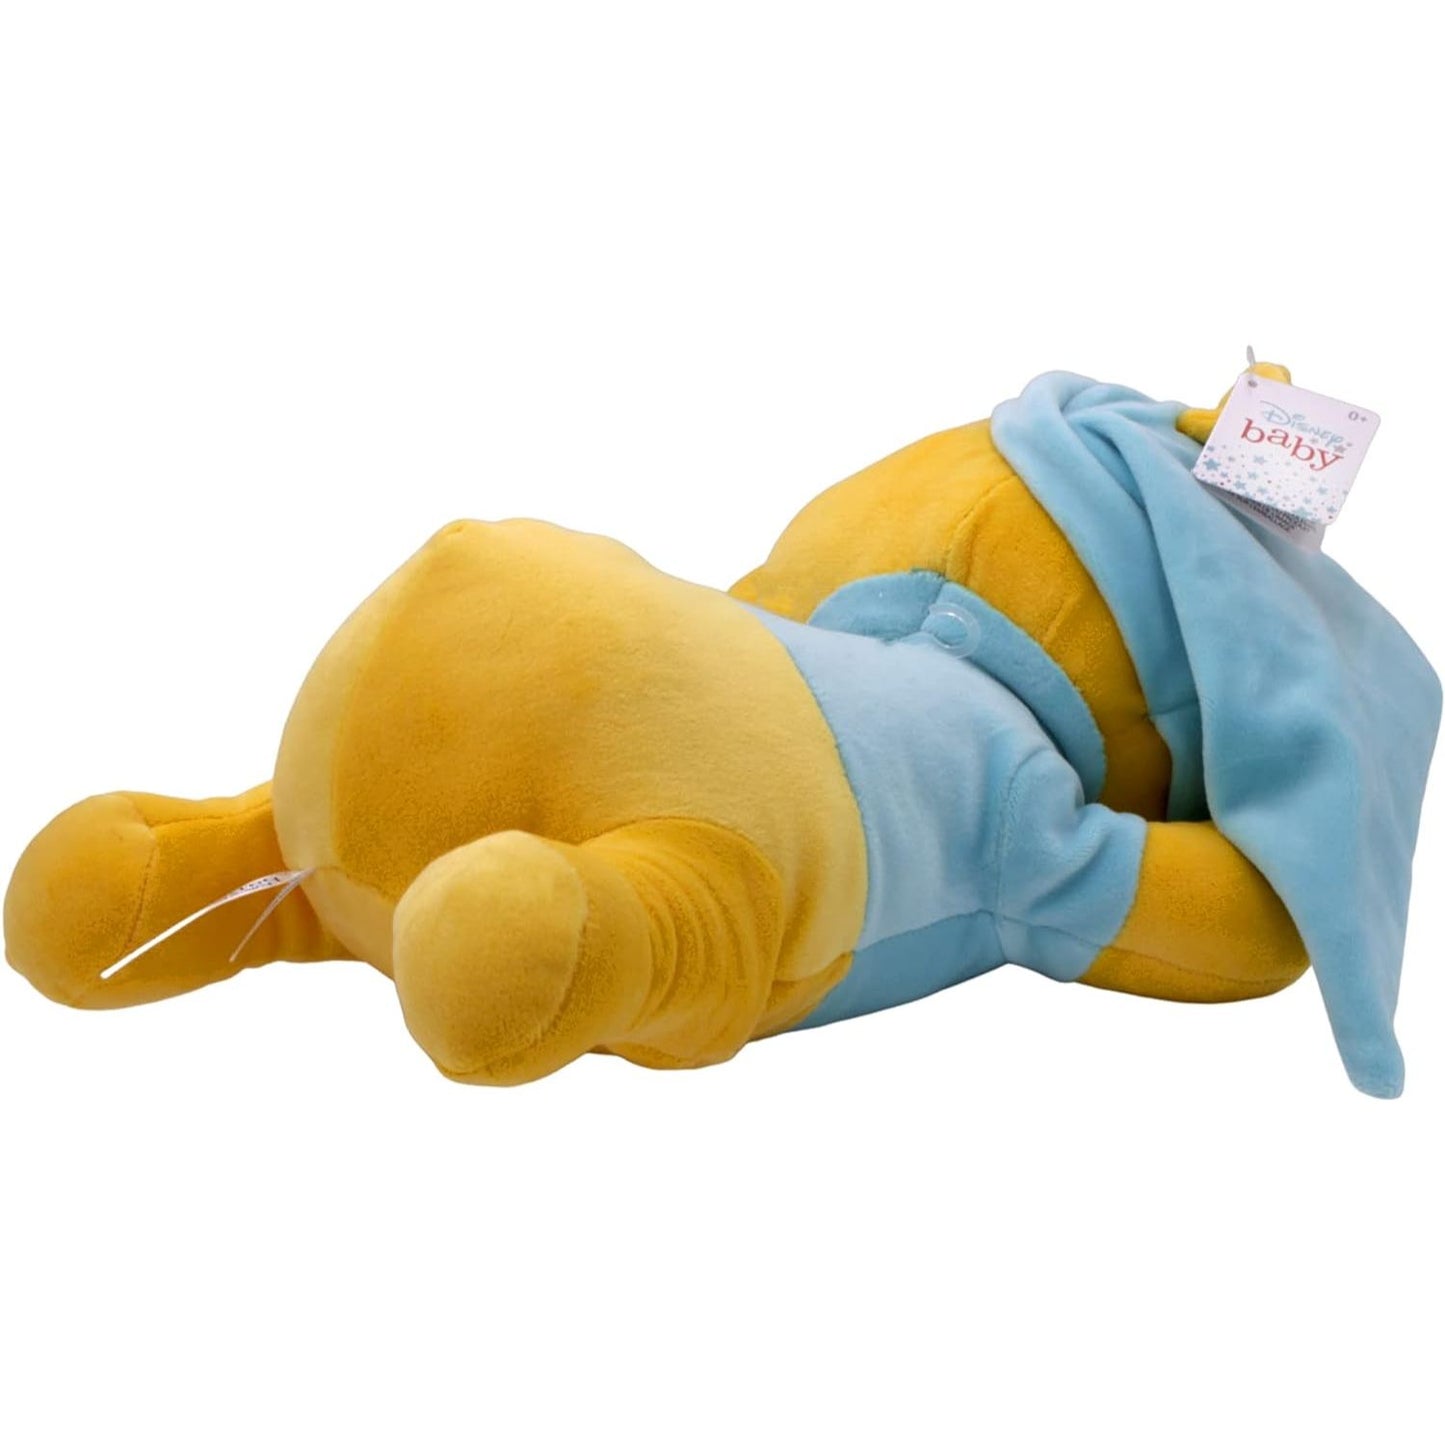 Back view of the winnie the pooh plush toy - Heretoserveyou